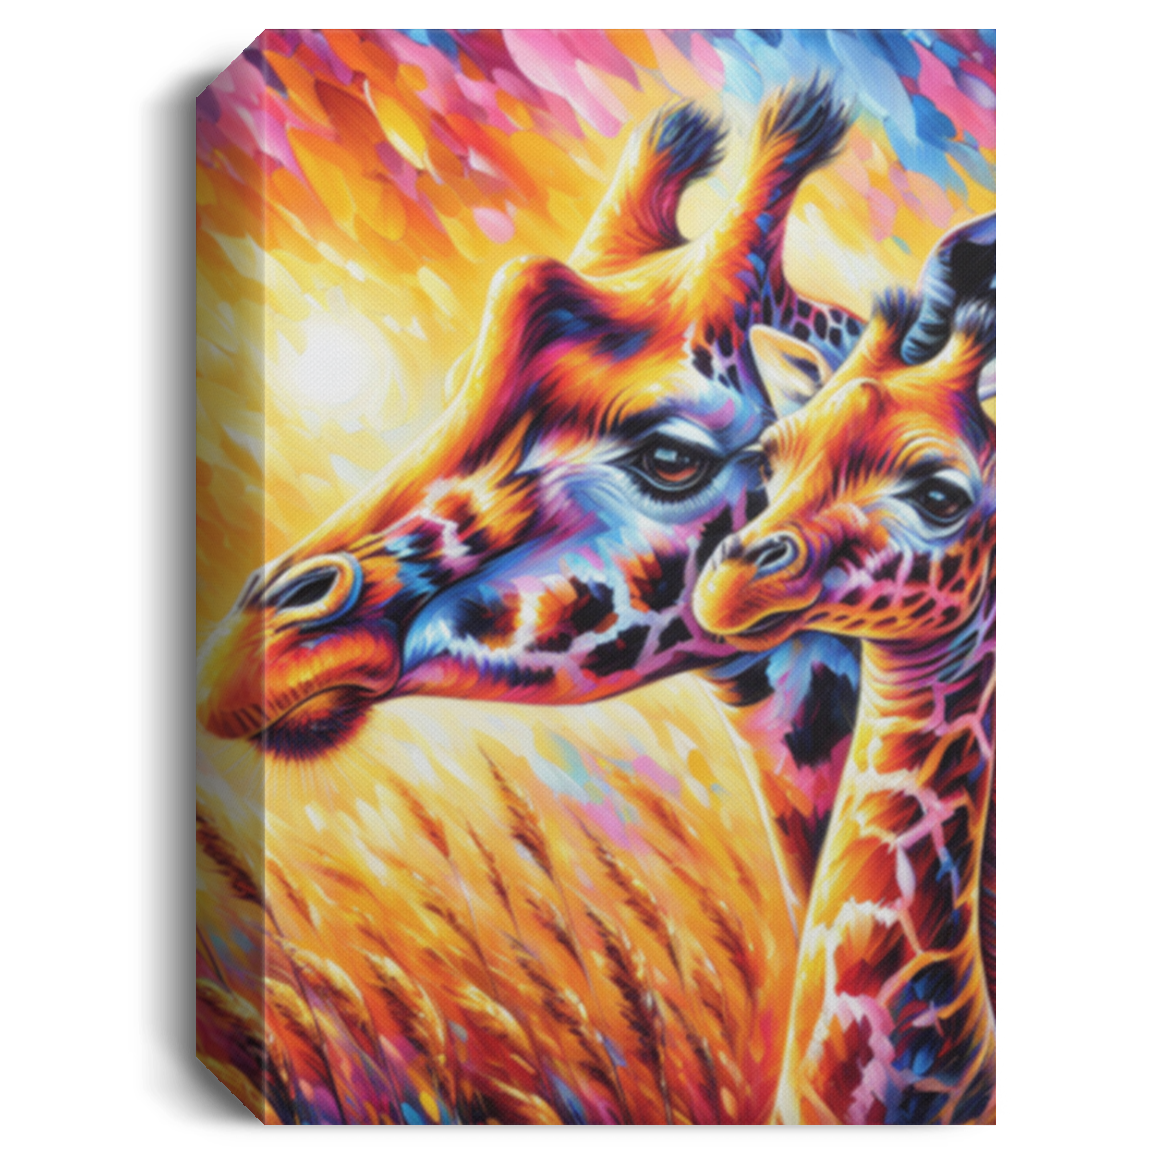 Giraffe with Young - Canvas Art Prints